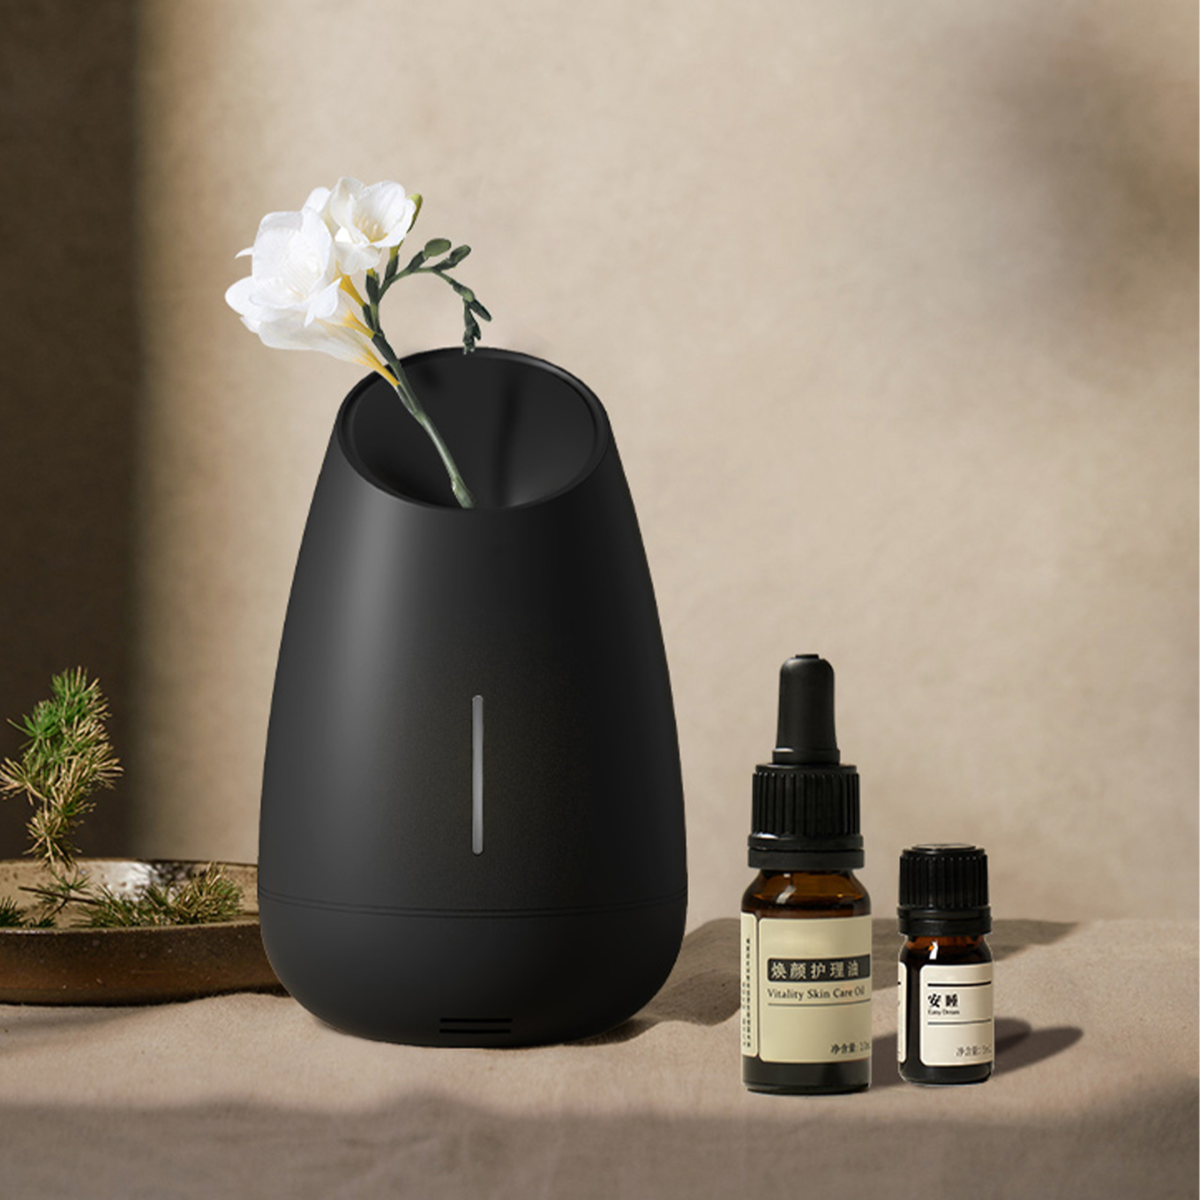 6. Transform Your Home with Relaxing Scents: Aromatherapy Diffuser, the Perfect Anniversary Gift Idea